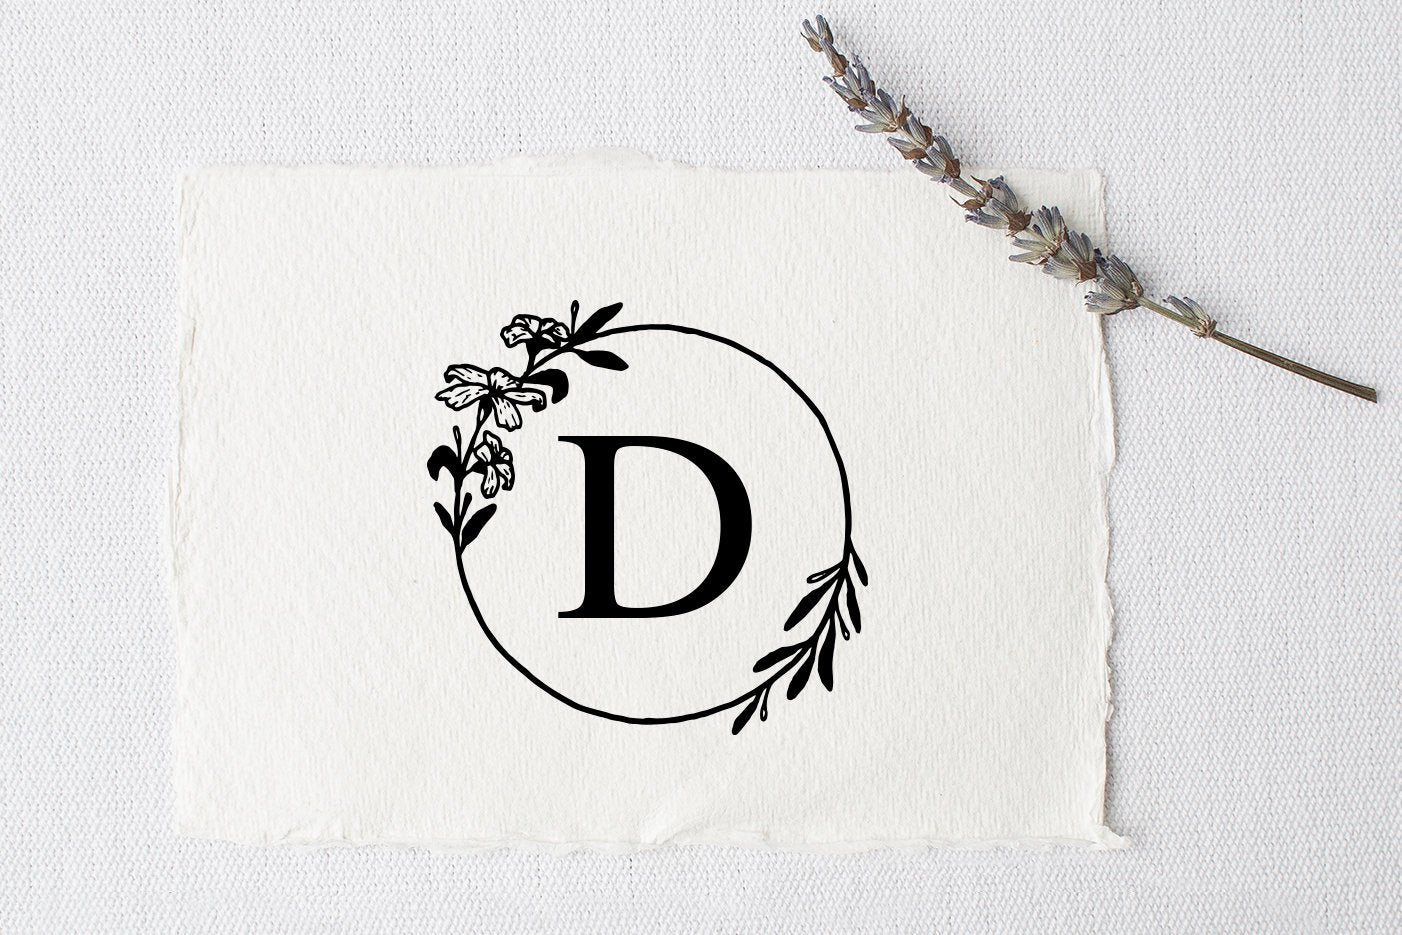 Wedding Rubber Stamp for Wedding Favors, Napkins, Cards. Custom Rubber Stamp, DIY Wedding Stamp, Botanical. Custom Stamp 2 to 4 Inch - W42